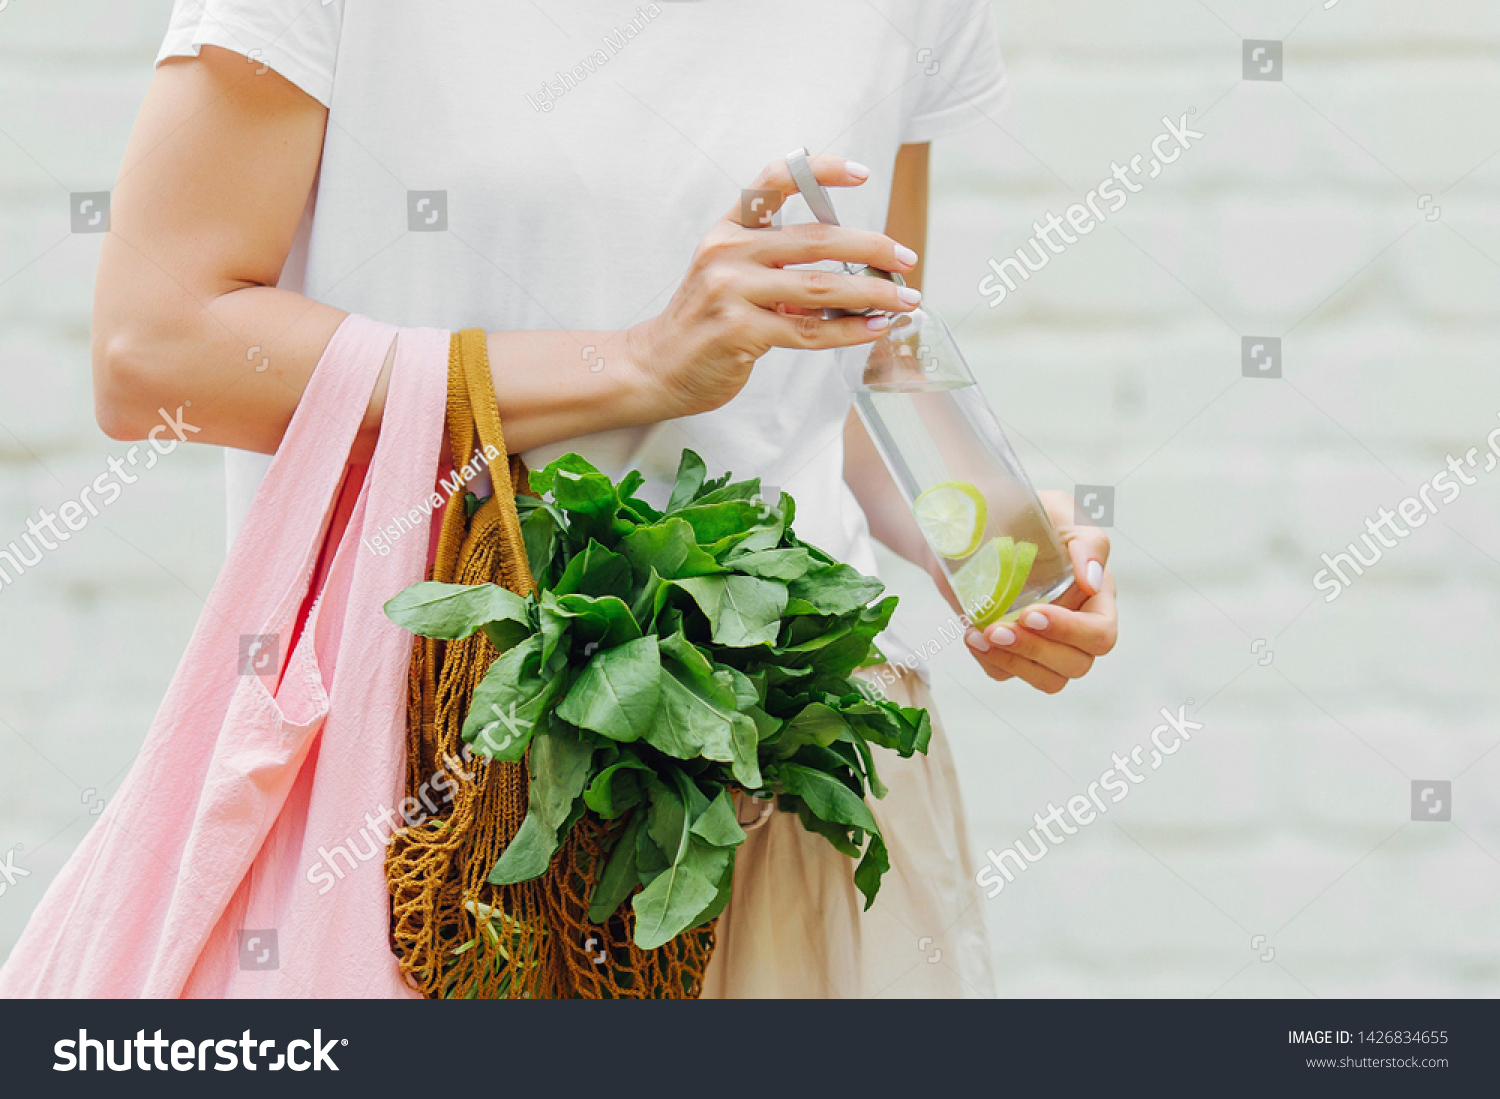 Female hands hold eco bag of vegetables, greens and reusable water bottle. Zero waste. Sustainable lifestyle concept. #1426834655